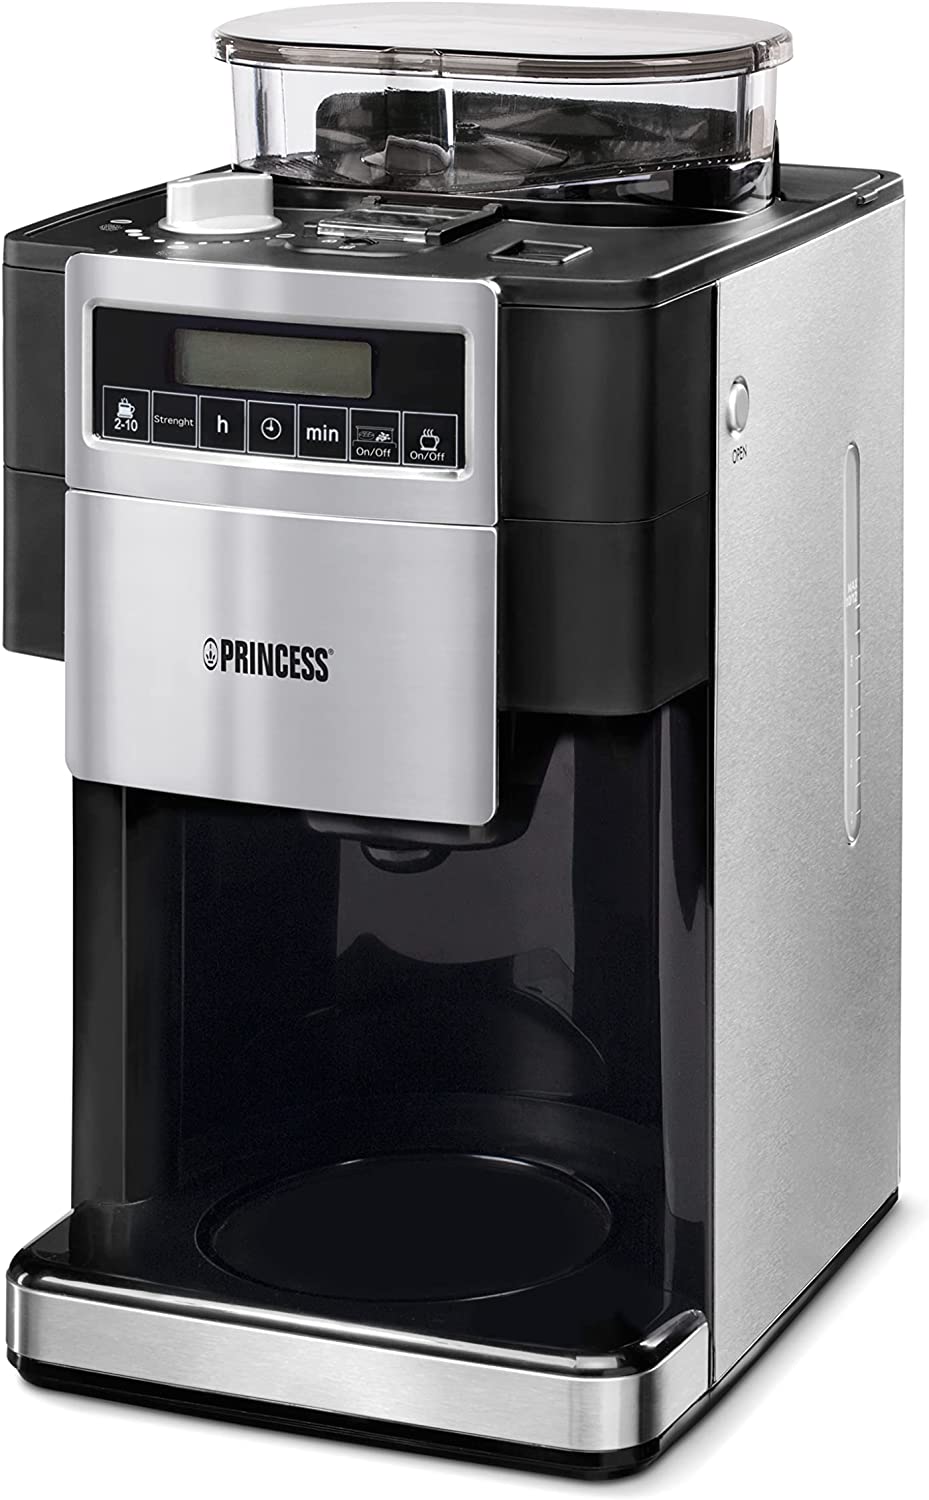 Princess 249411 Coffee Machine with Grinder, Adjustable Grind, Up to 10 Cups, Timer Function, Black